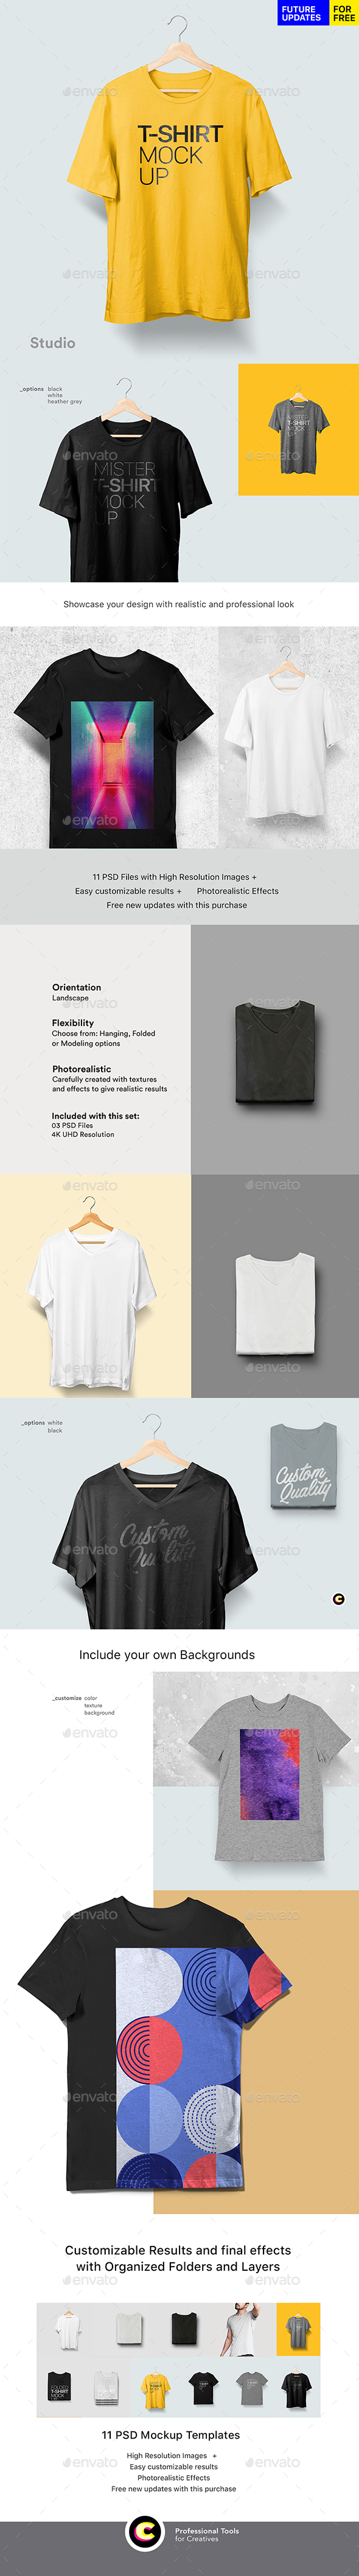 Download Clothing Apparel Mockups From Graphicriver PSD Mockup Templates